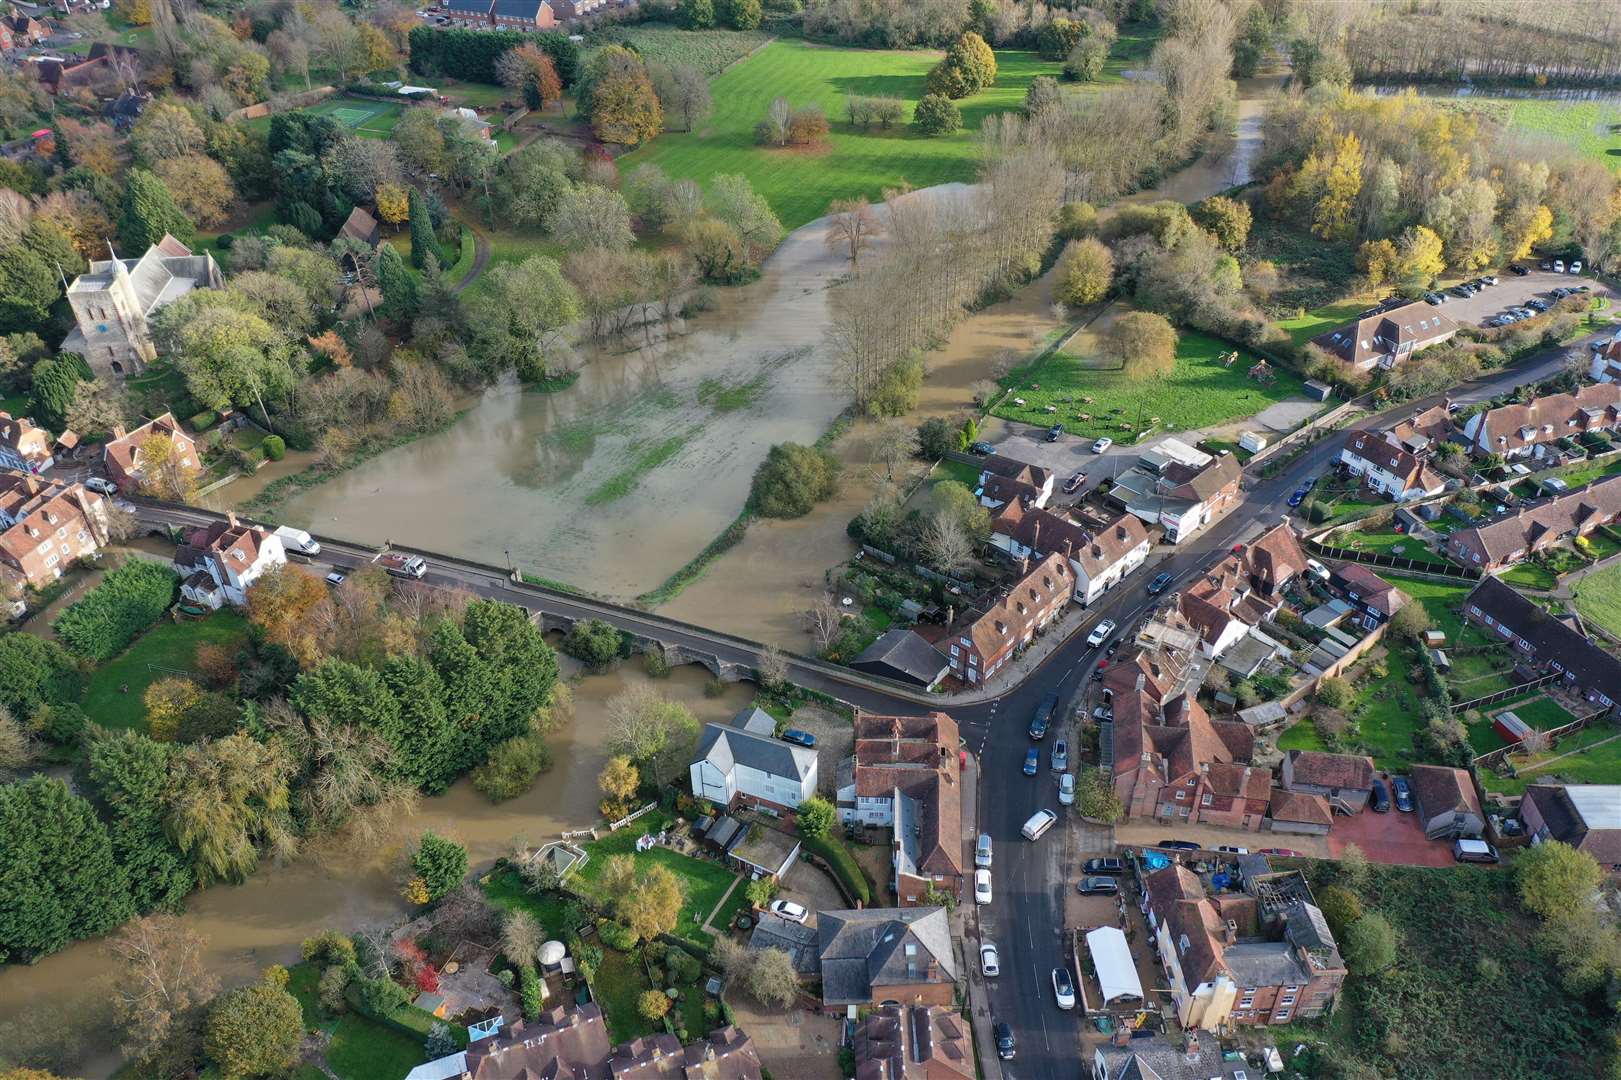 Yalding was heavily impacted by flash flooding in November. Picture: UKNIP